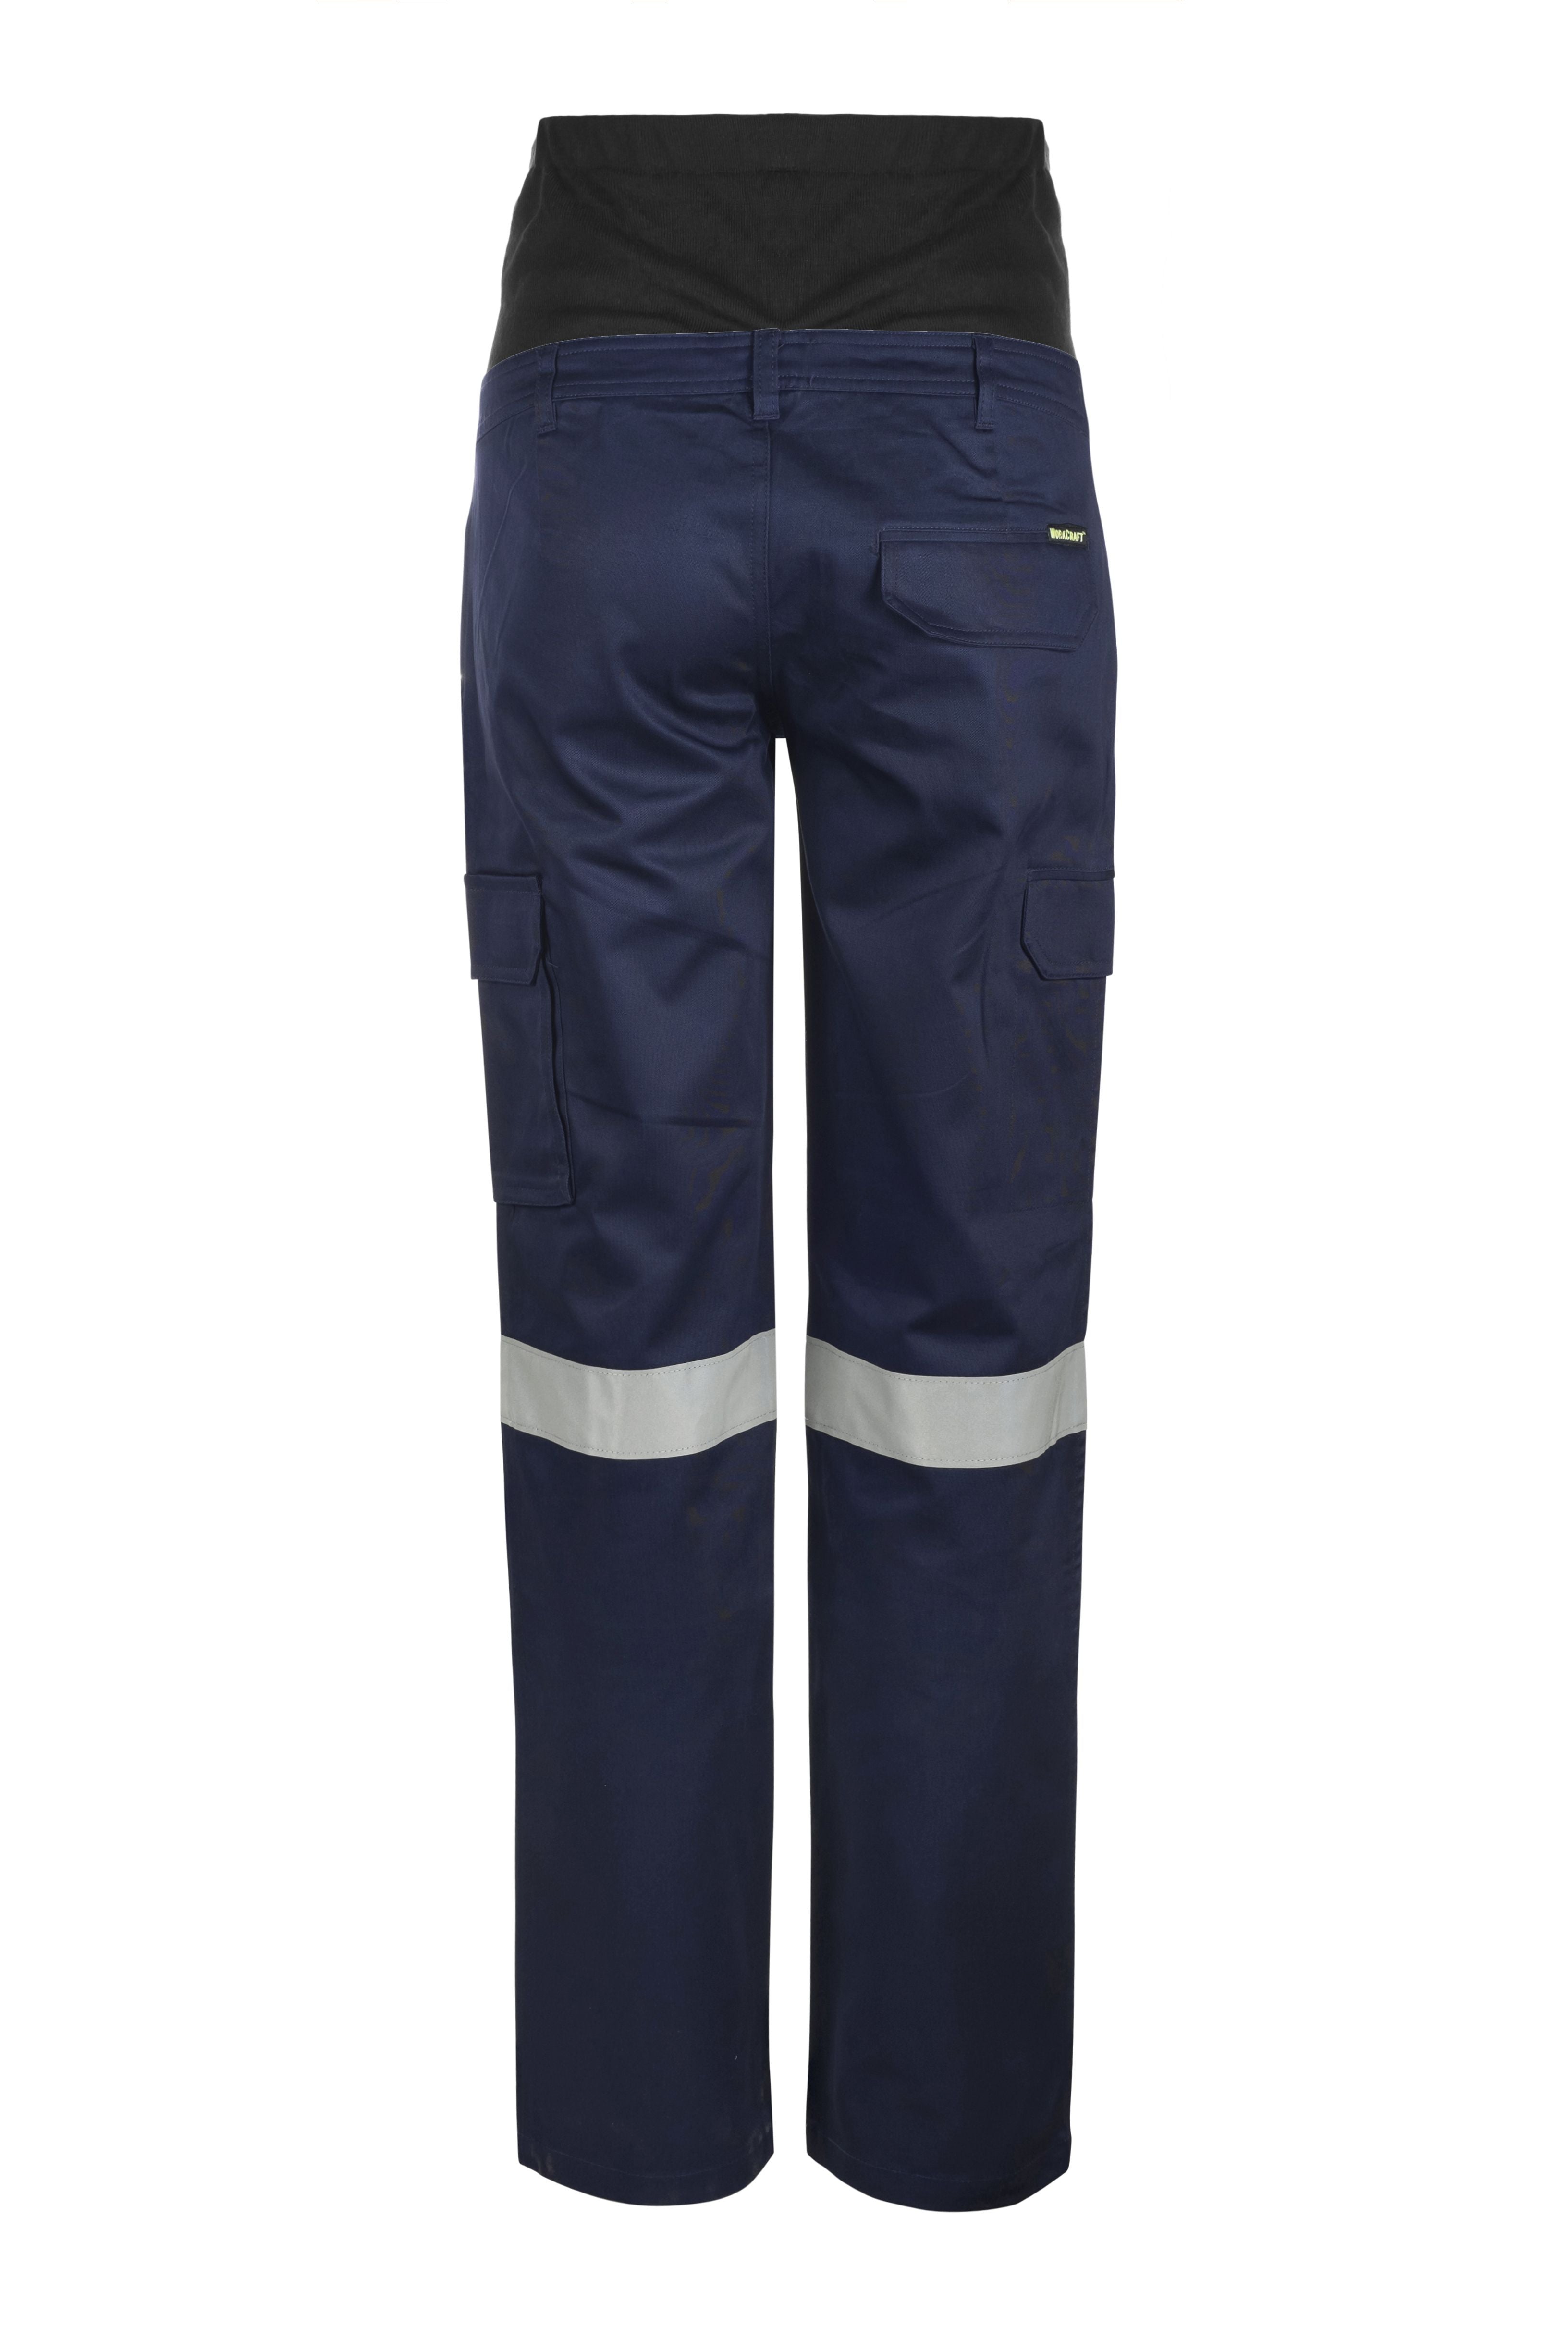 WORKCRAFT MATERNITY CARGO TROUSERS W-TAPE DRS